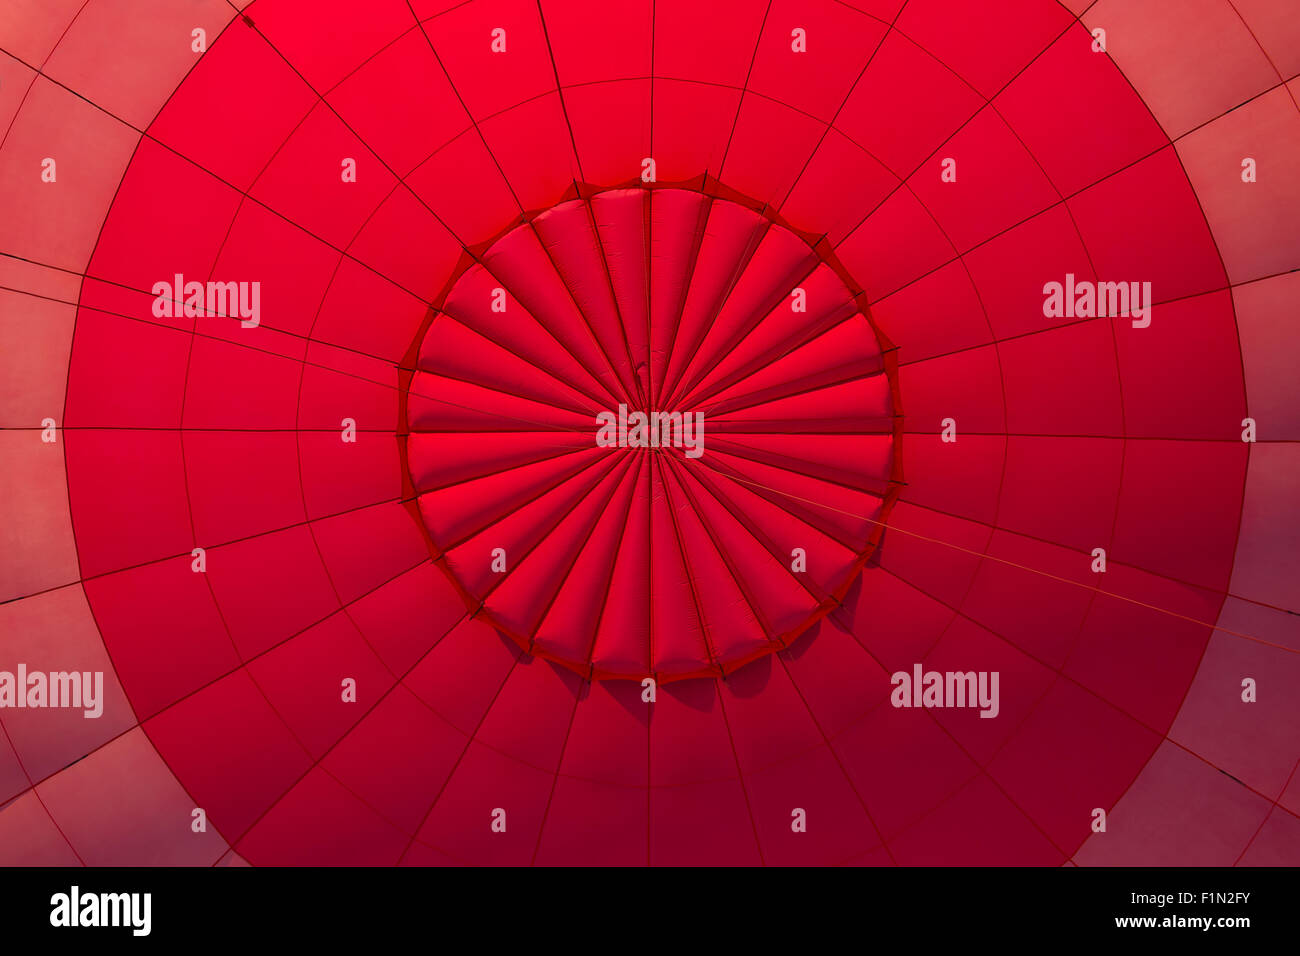 geometric abstract view inside a red hot air balloon Stock Photo